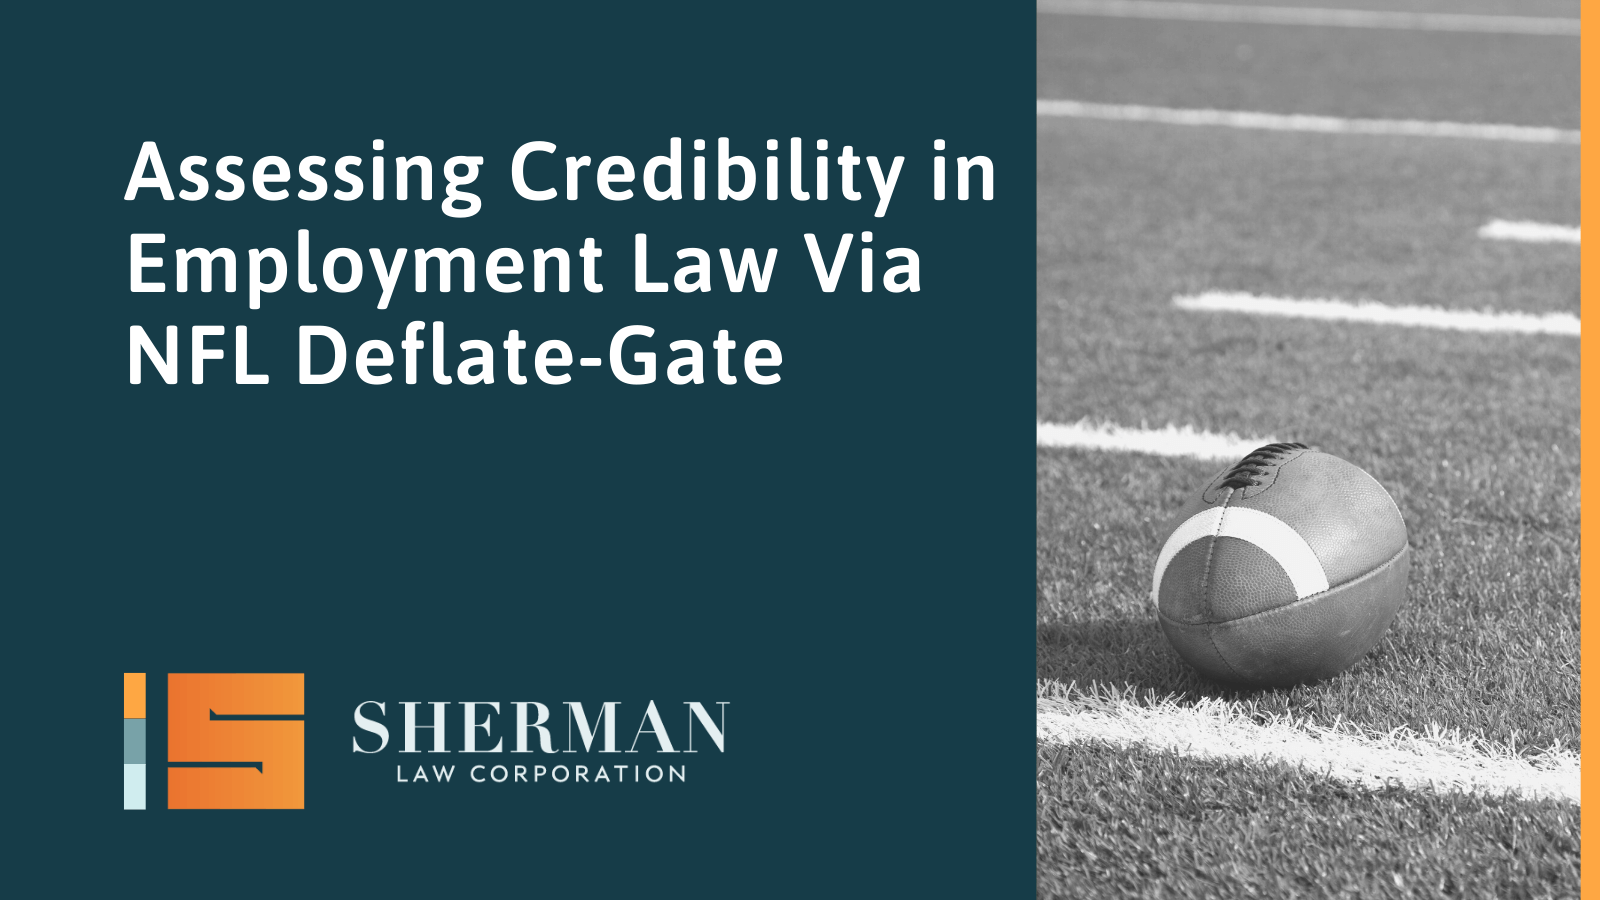 Assessing Credibility in Employment Law Via NFL Deflate-Gate- sherman law corporation